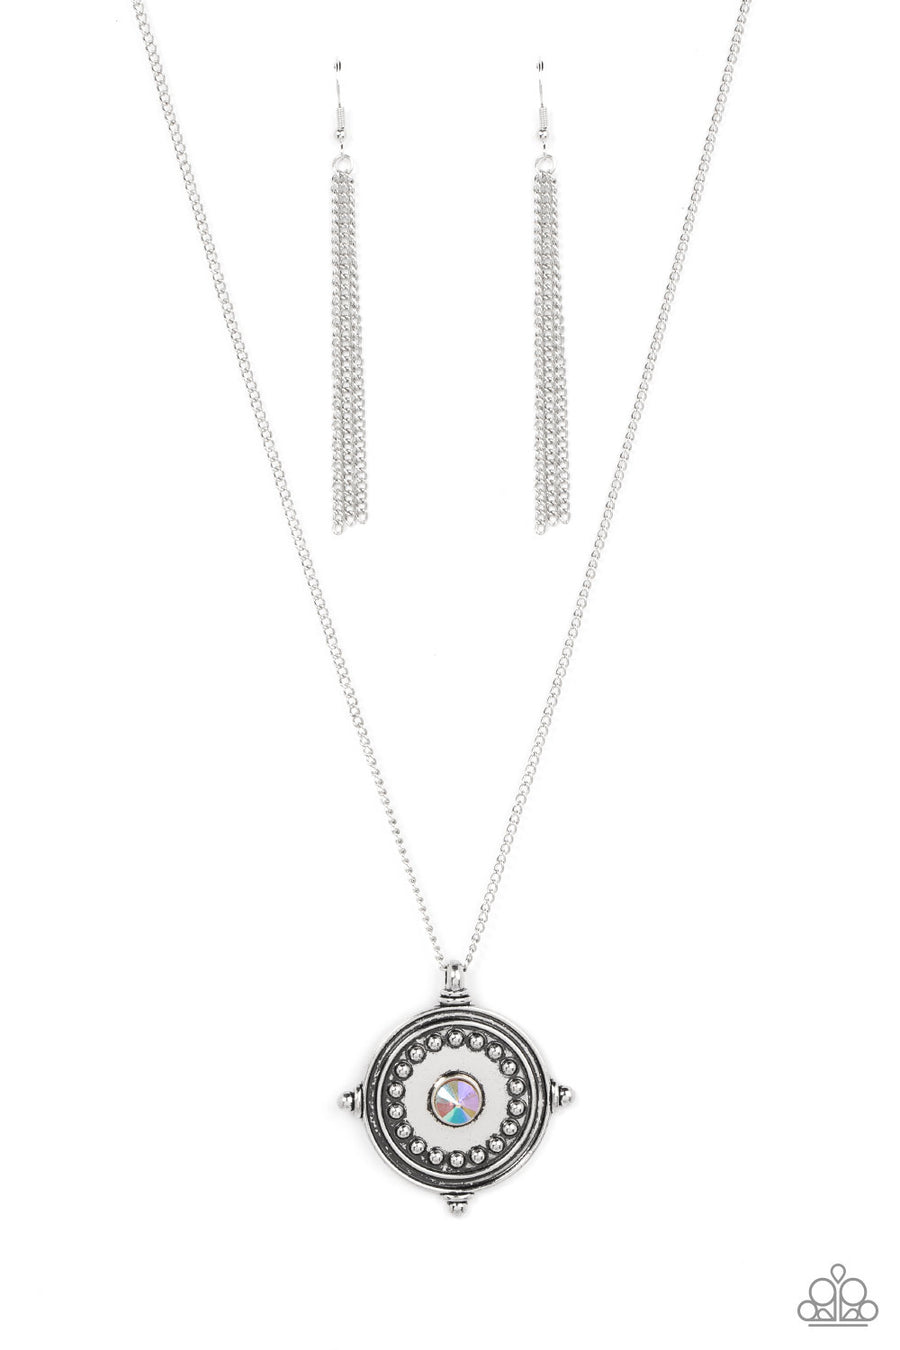 Compass Composure - Multi Necklace-Iridescent - Paparazzi Accessories - An iridescent rhinestone is pressed into the studded center of a compass inspired frame, creating a stellar pendant at the bottom of an extended silver chain.